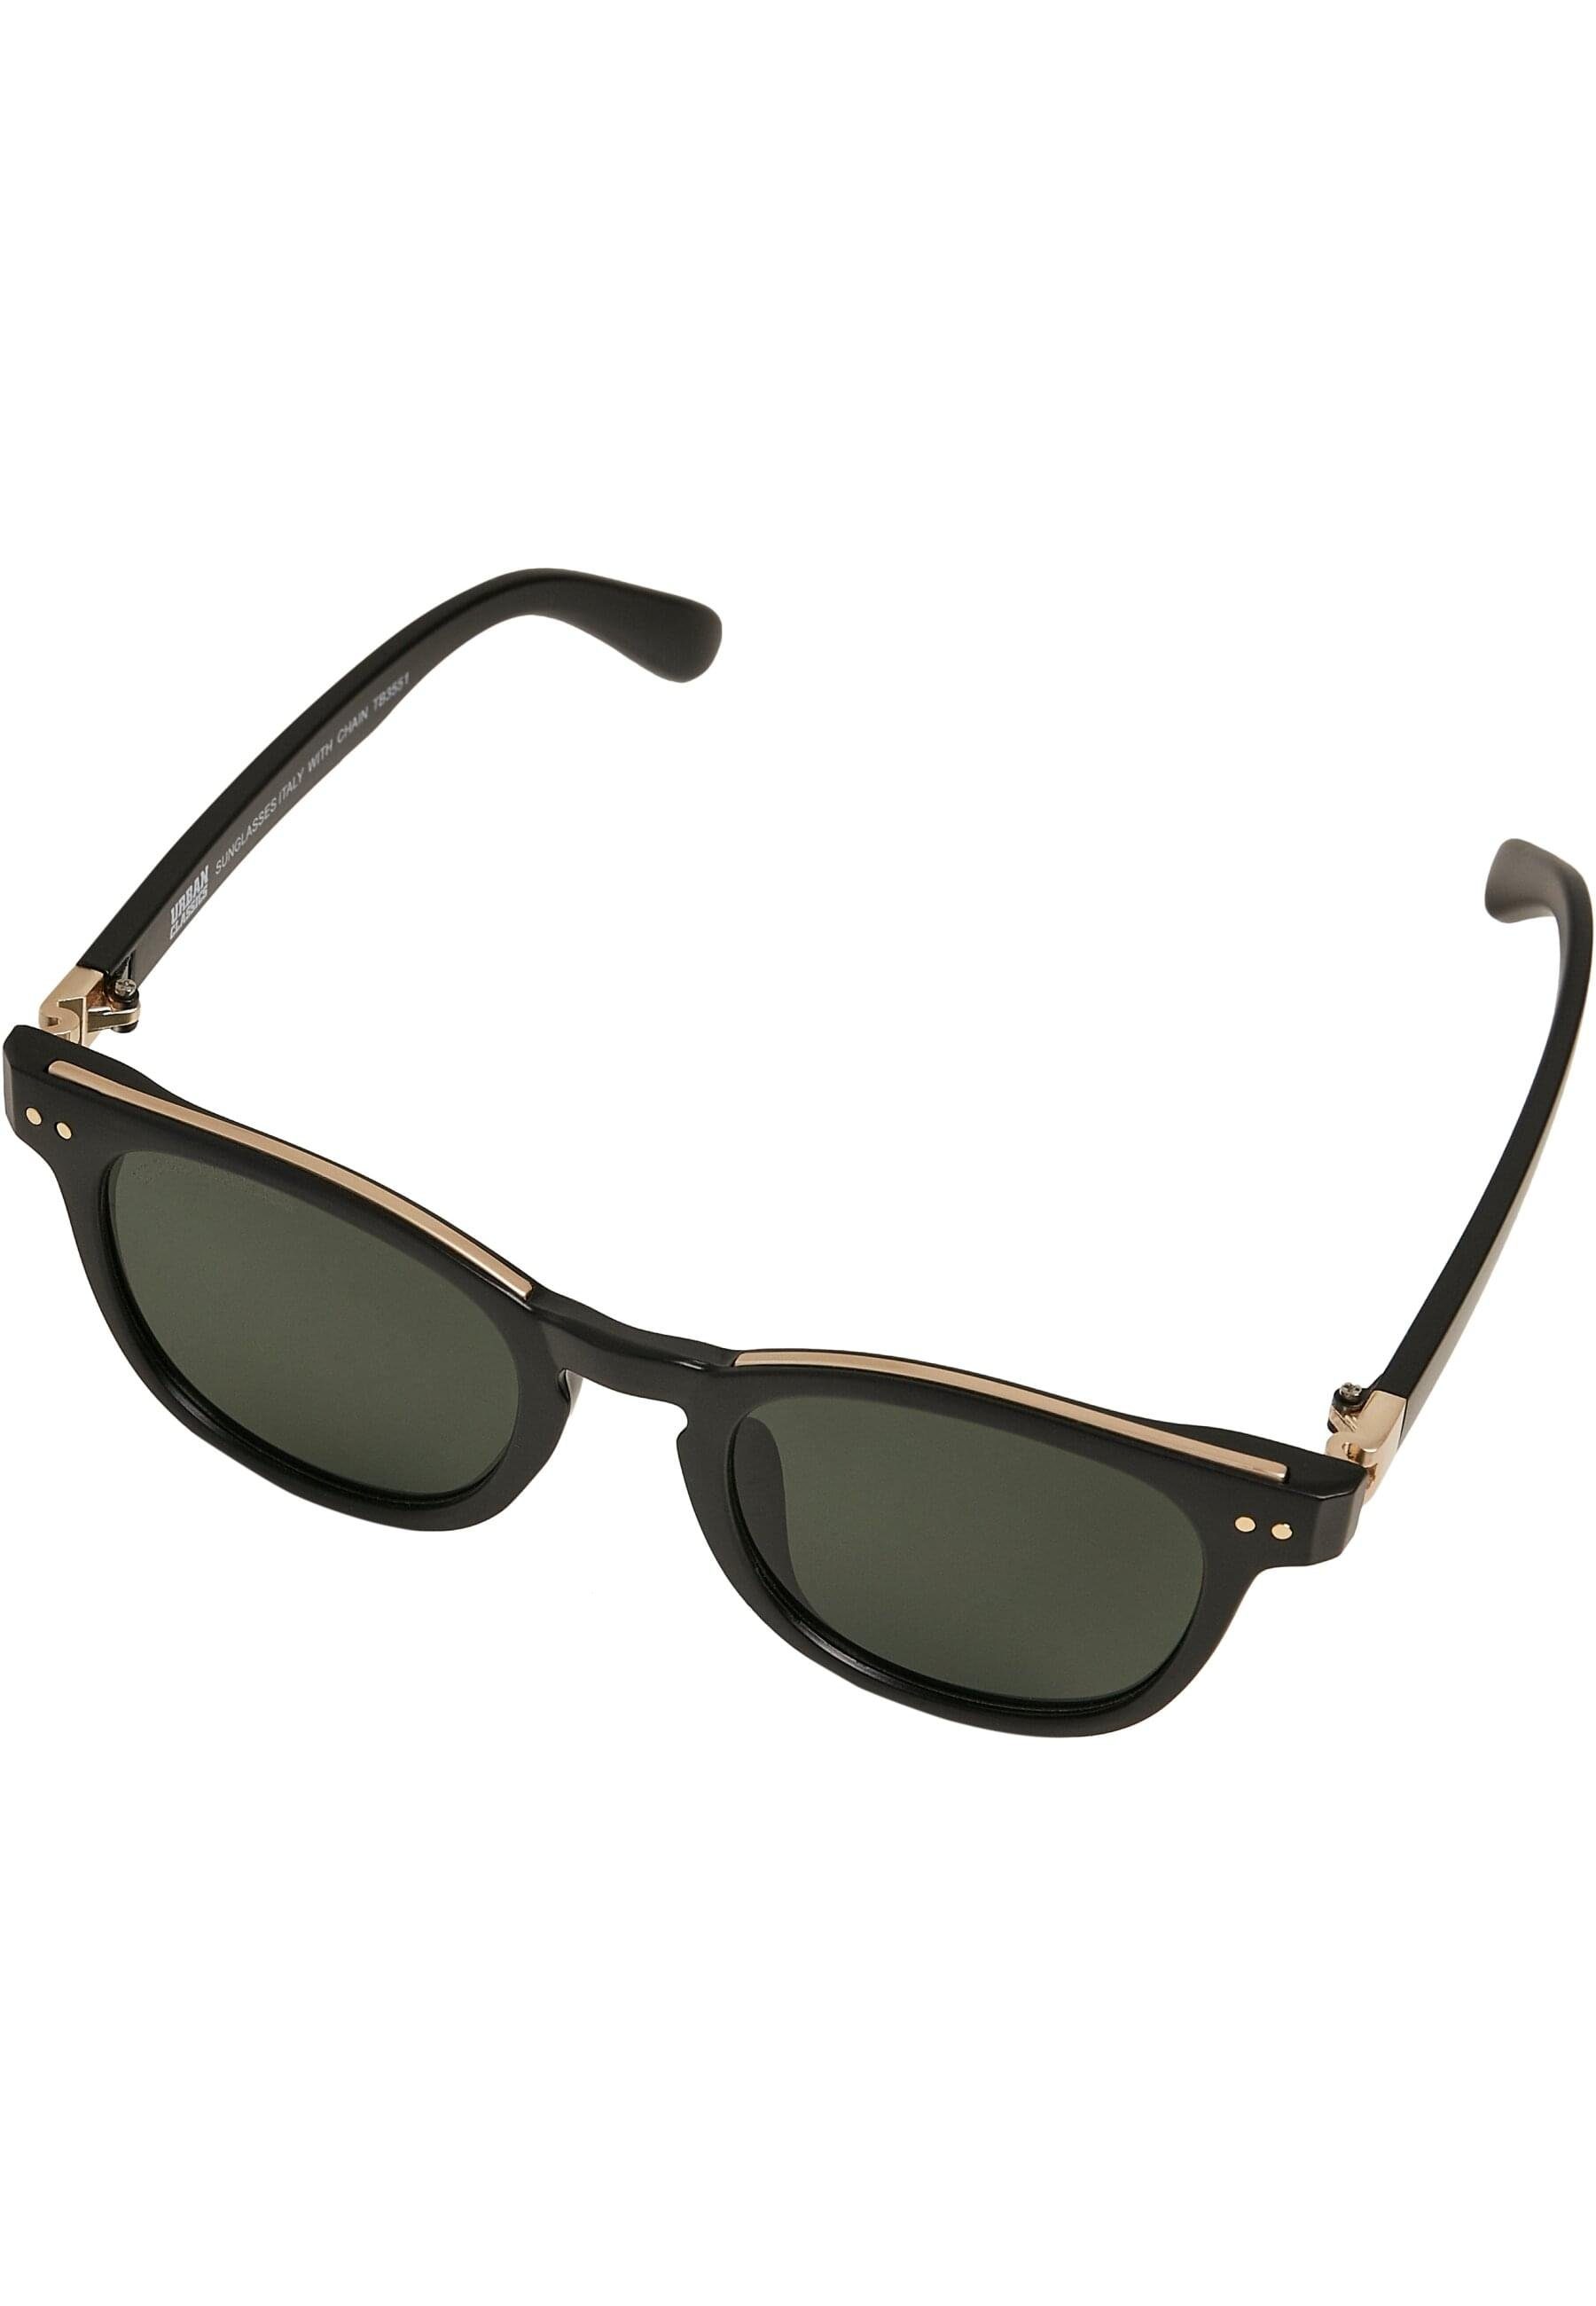 Sonnenbrille URBAN with CLASSICS black/gold/gold Italy Sunglasses Unisex chain